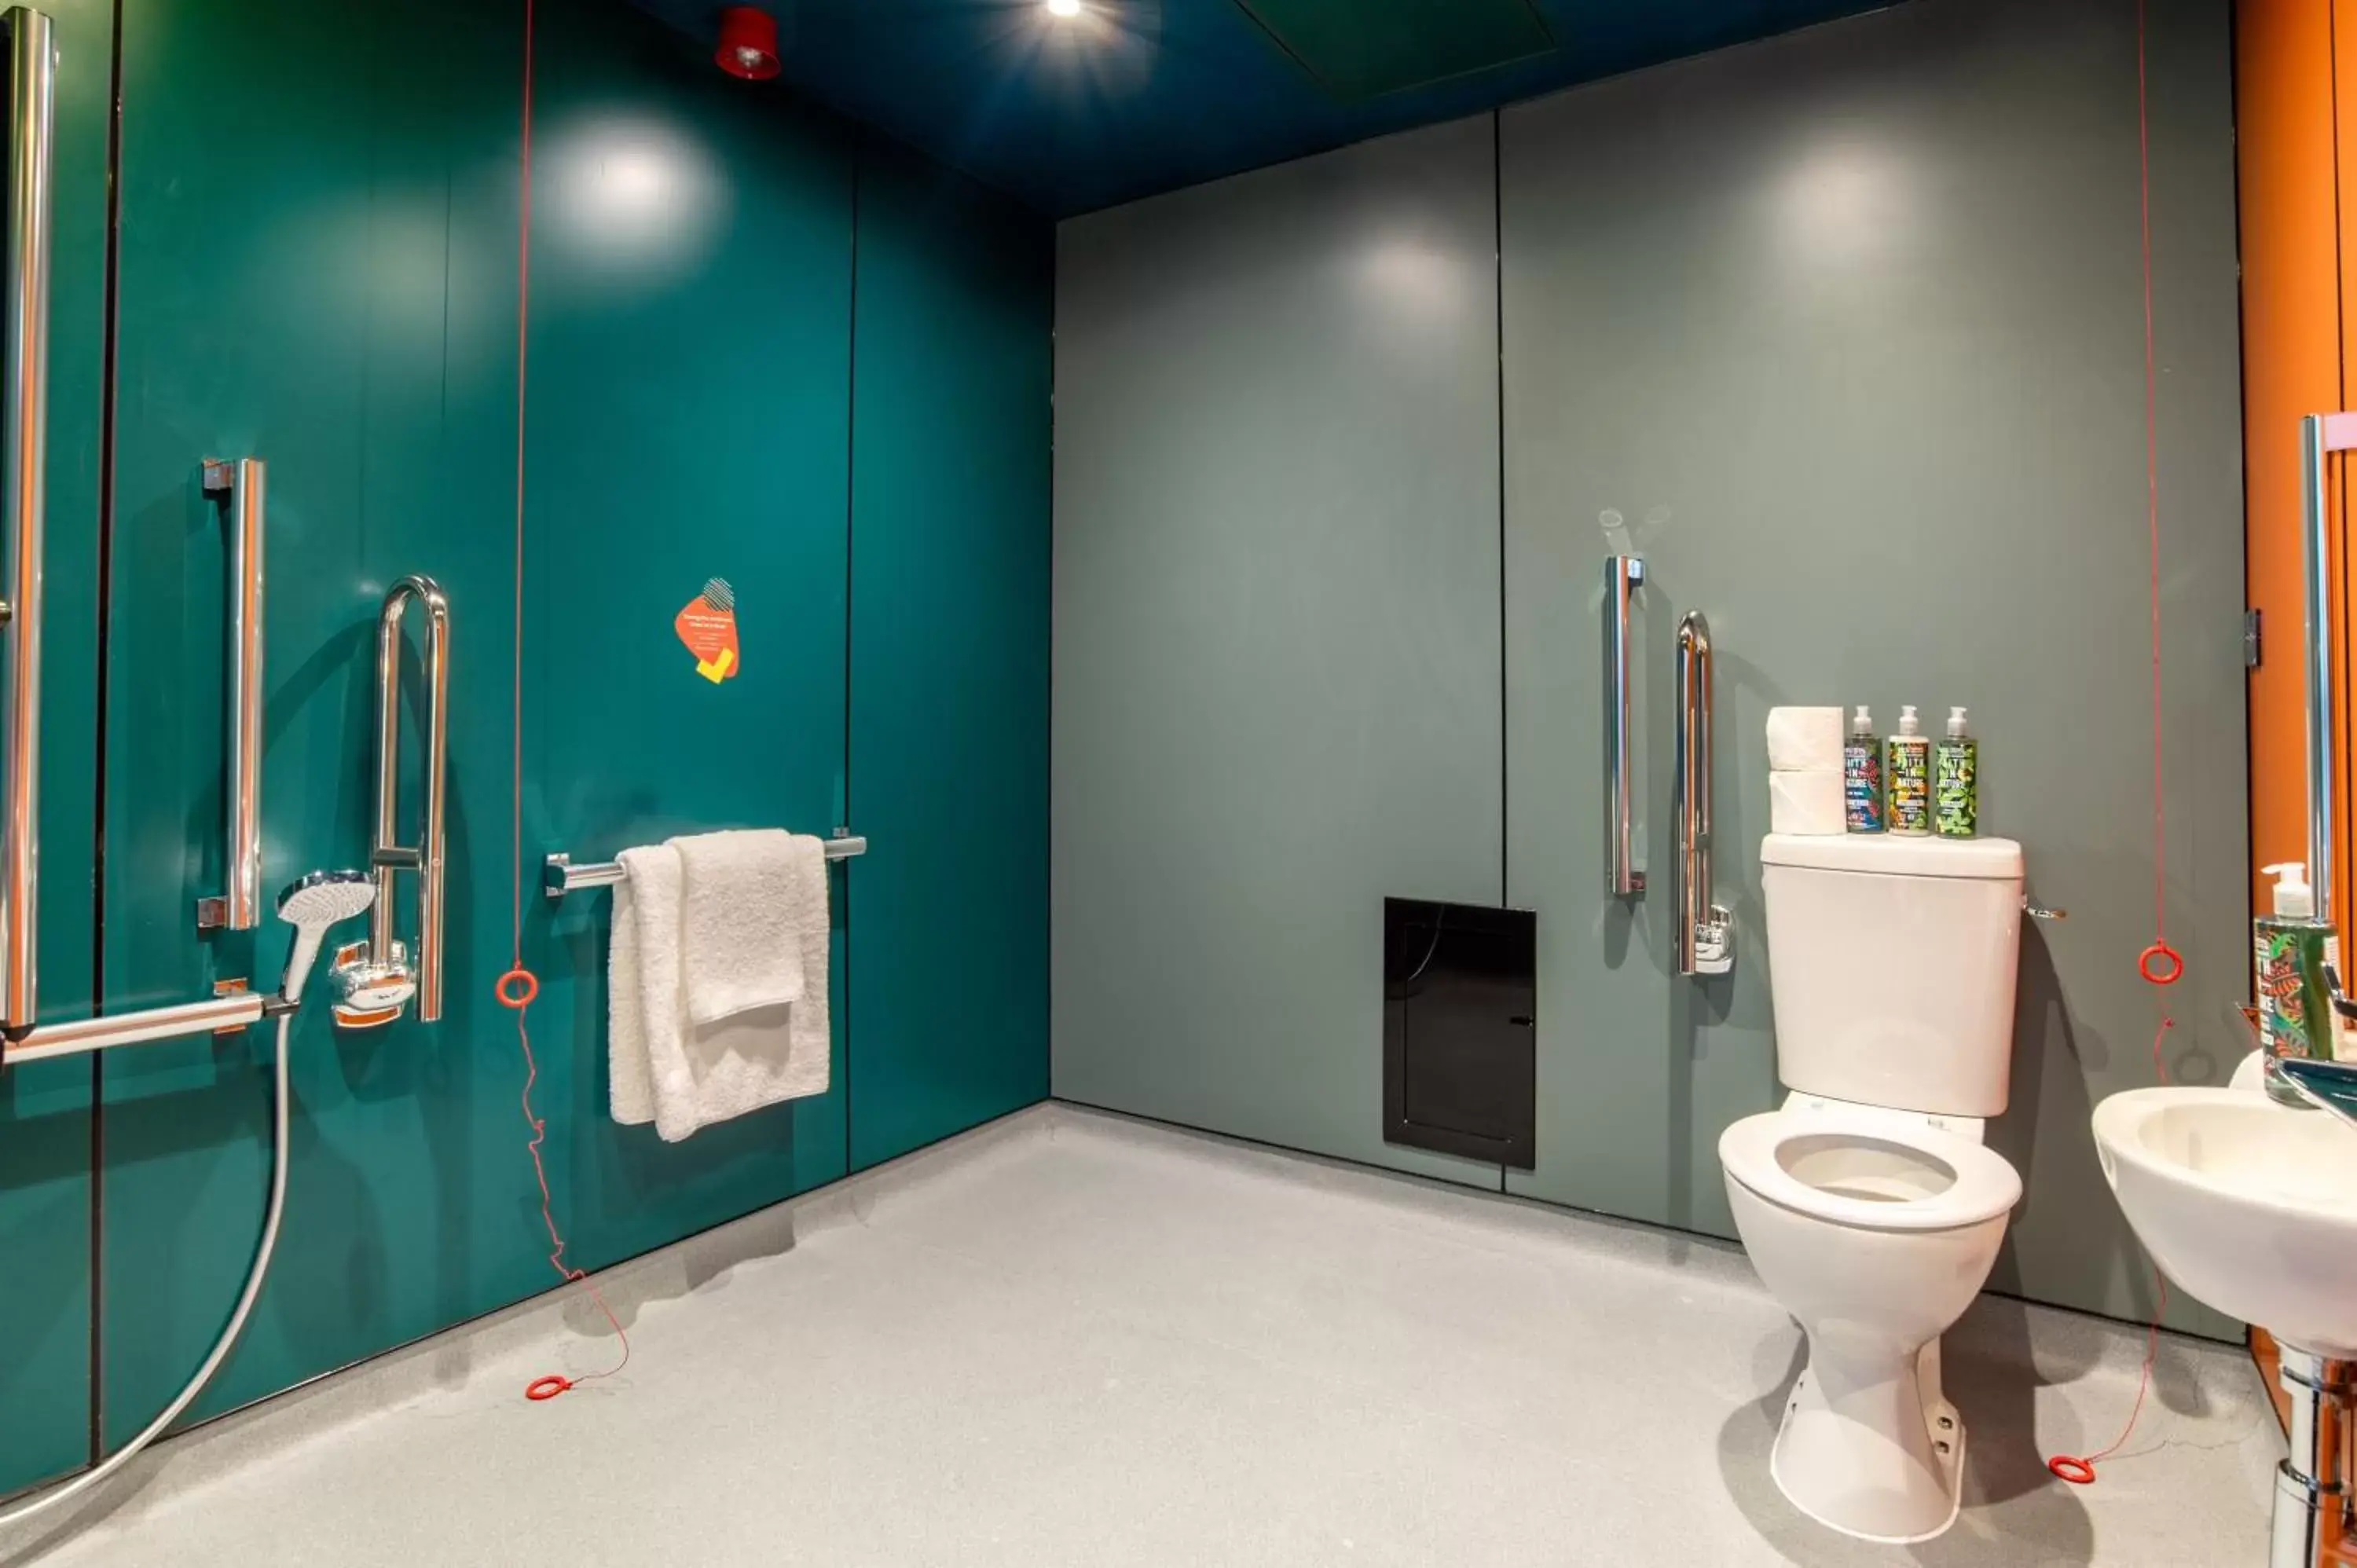 Facility for disabled guests, Bathroom in YOTEL Manchester Deansgate